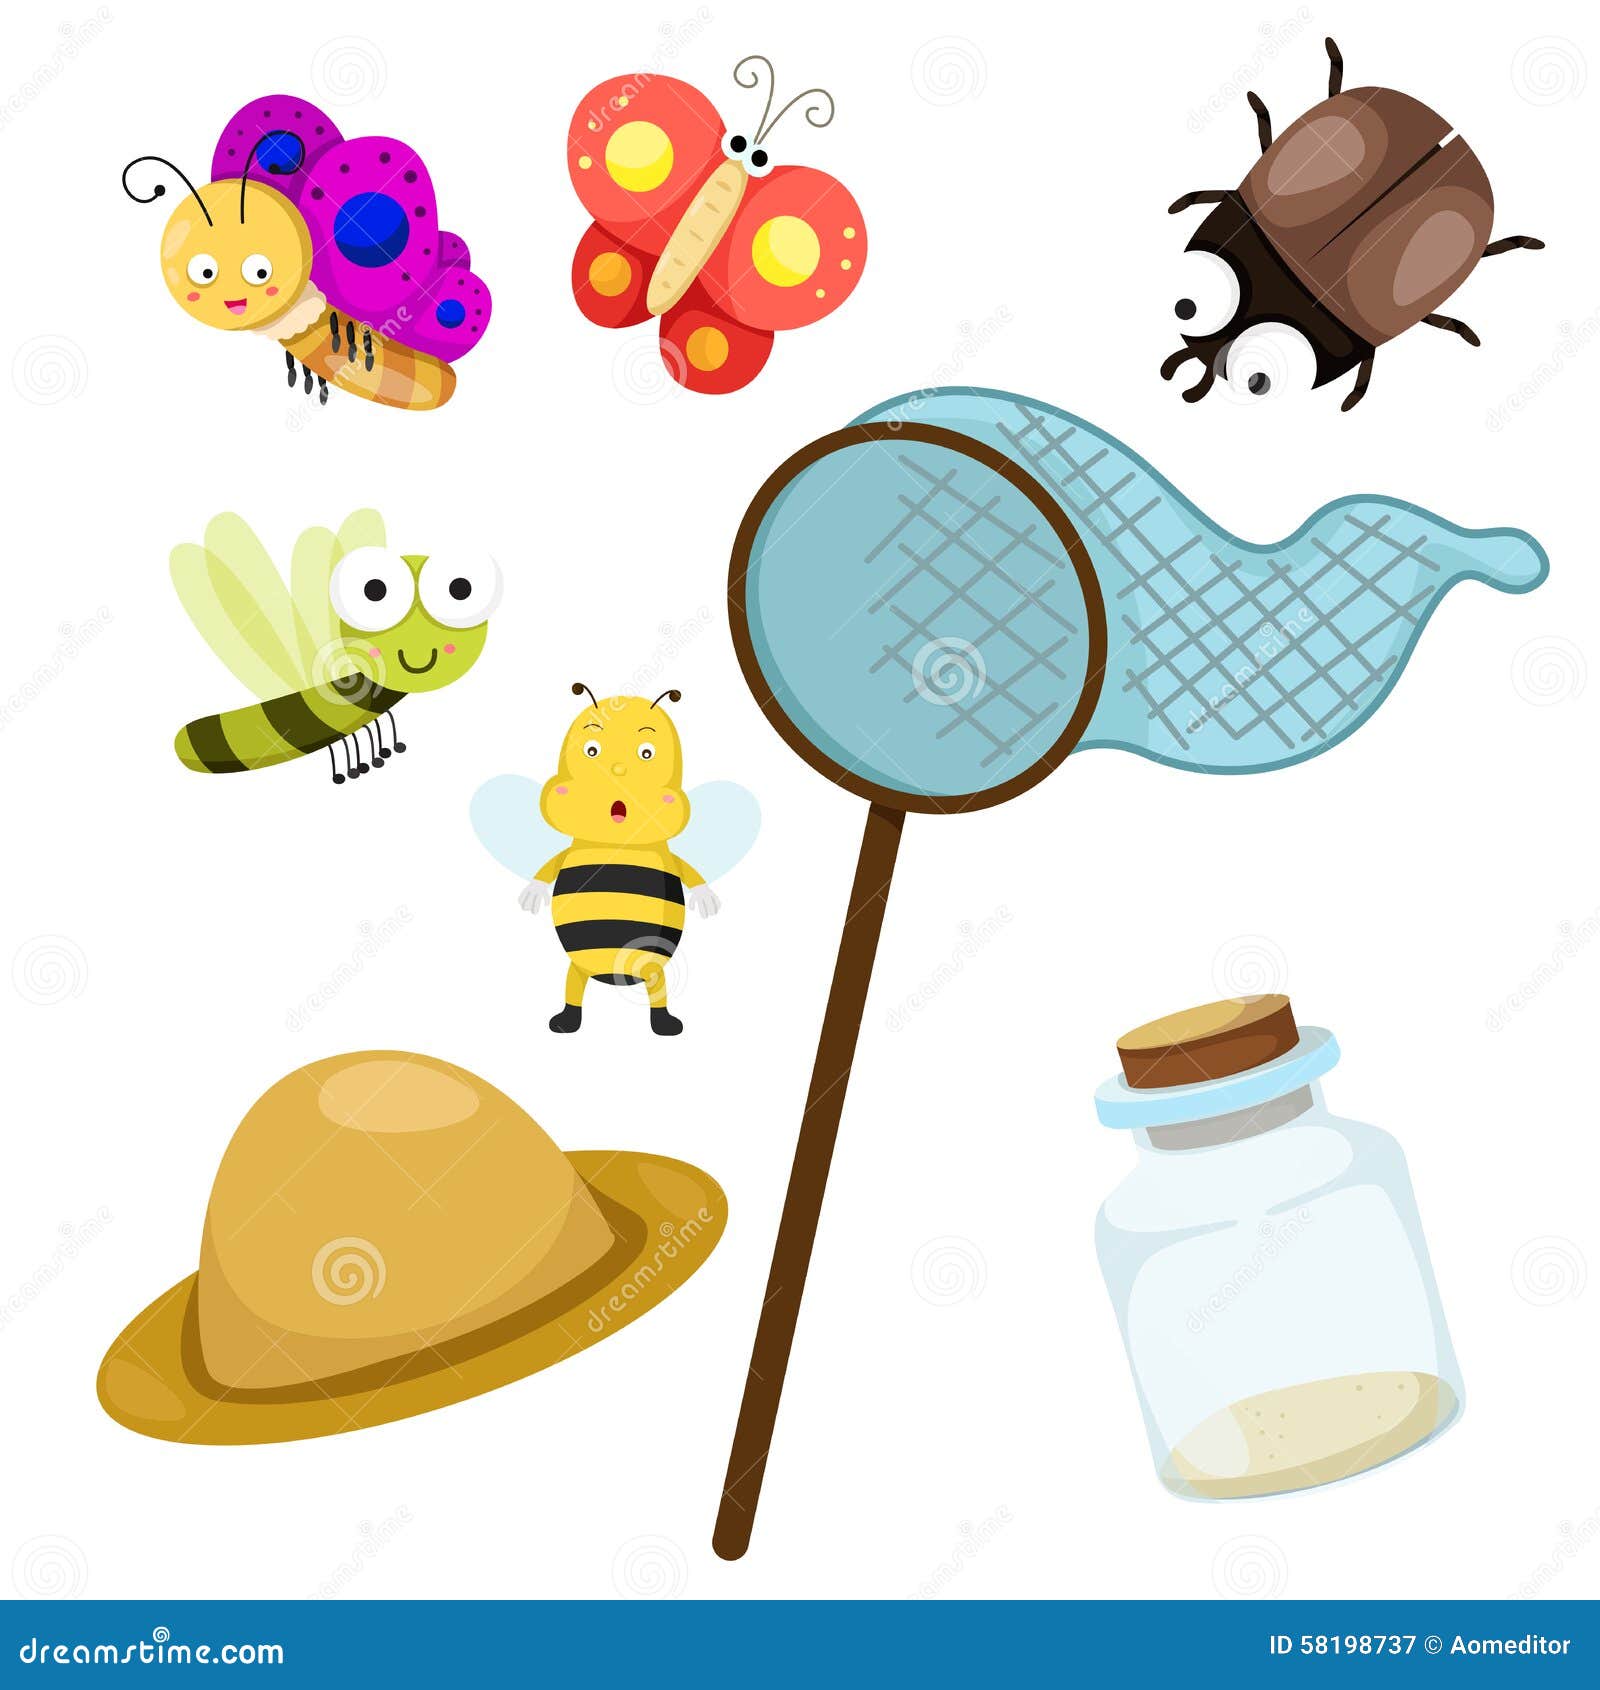 Illustrator of Bug with Net Stock Vector - Illustration of rope